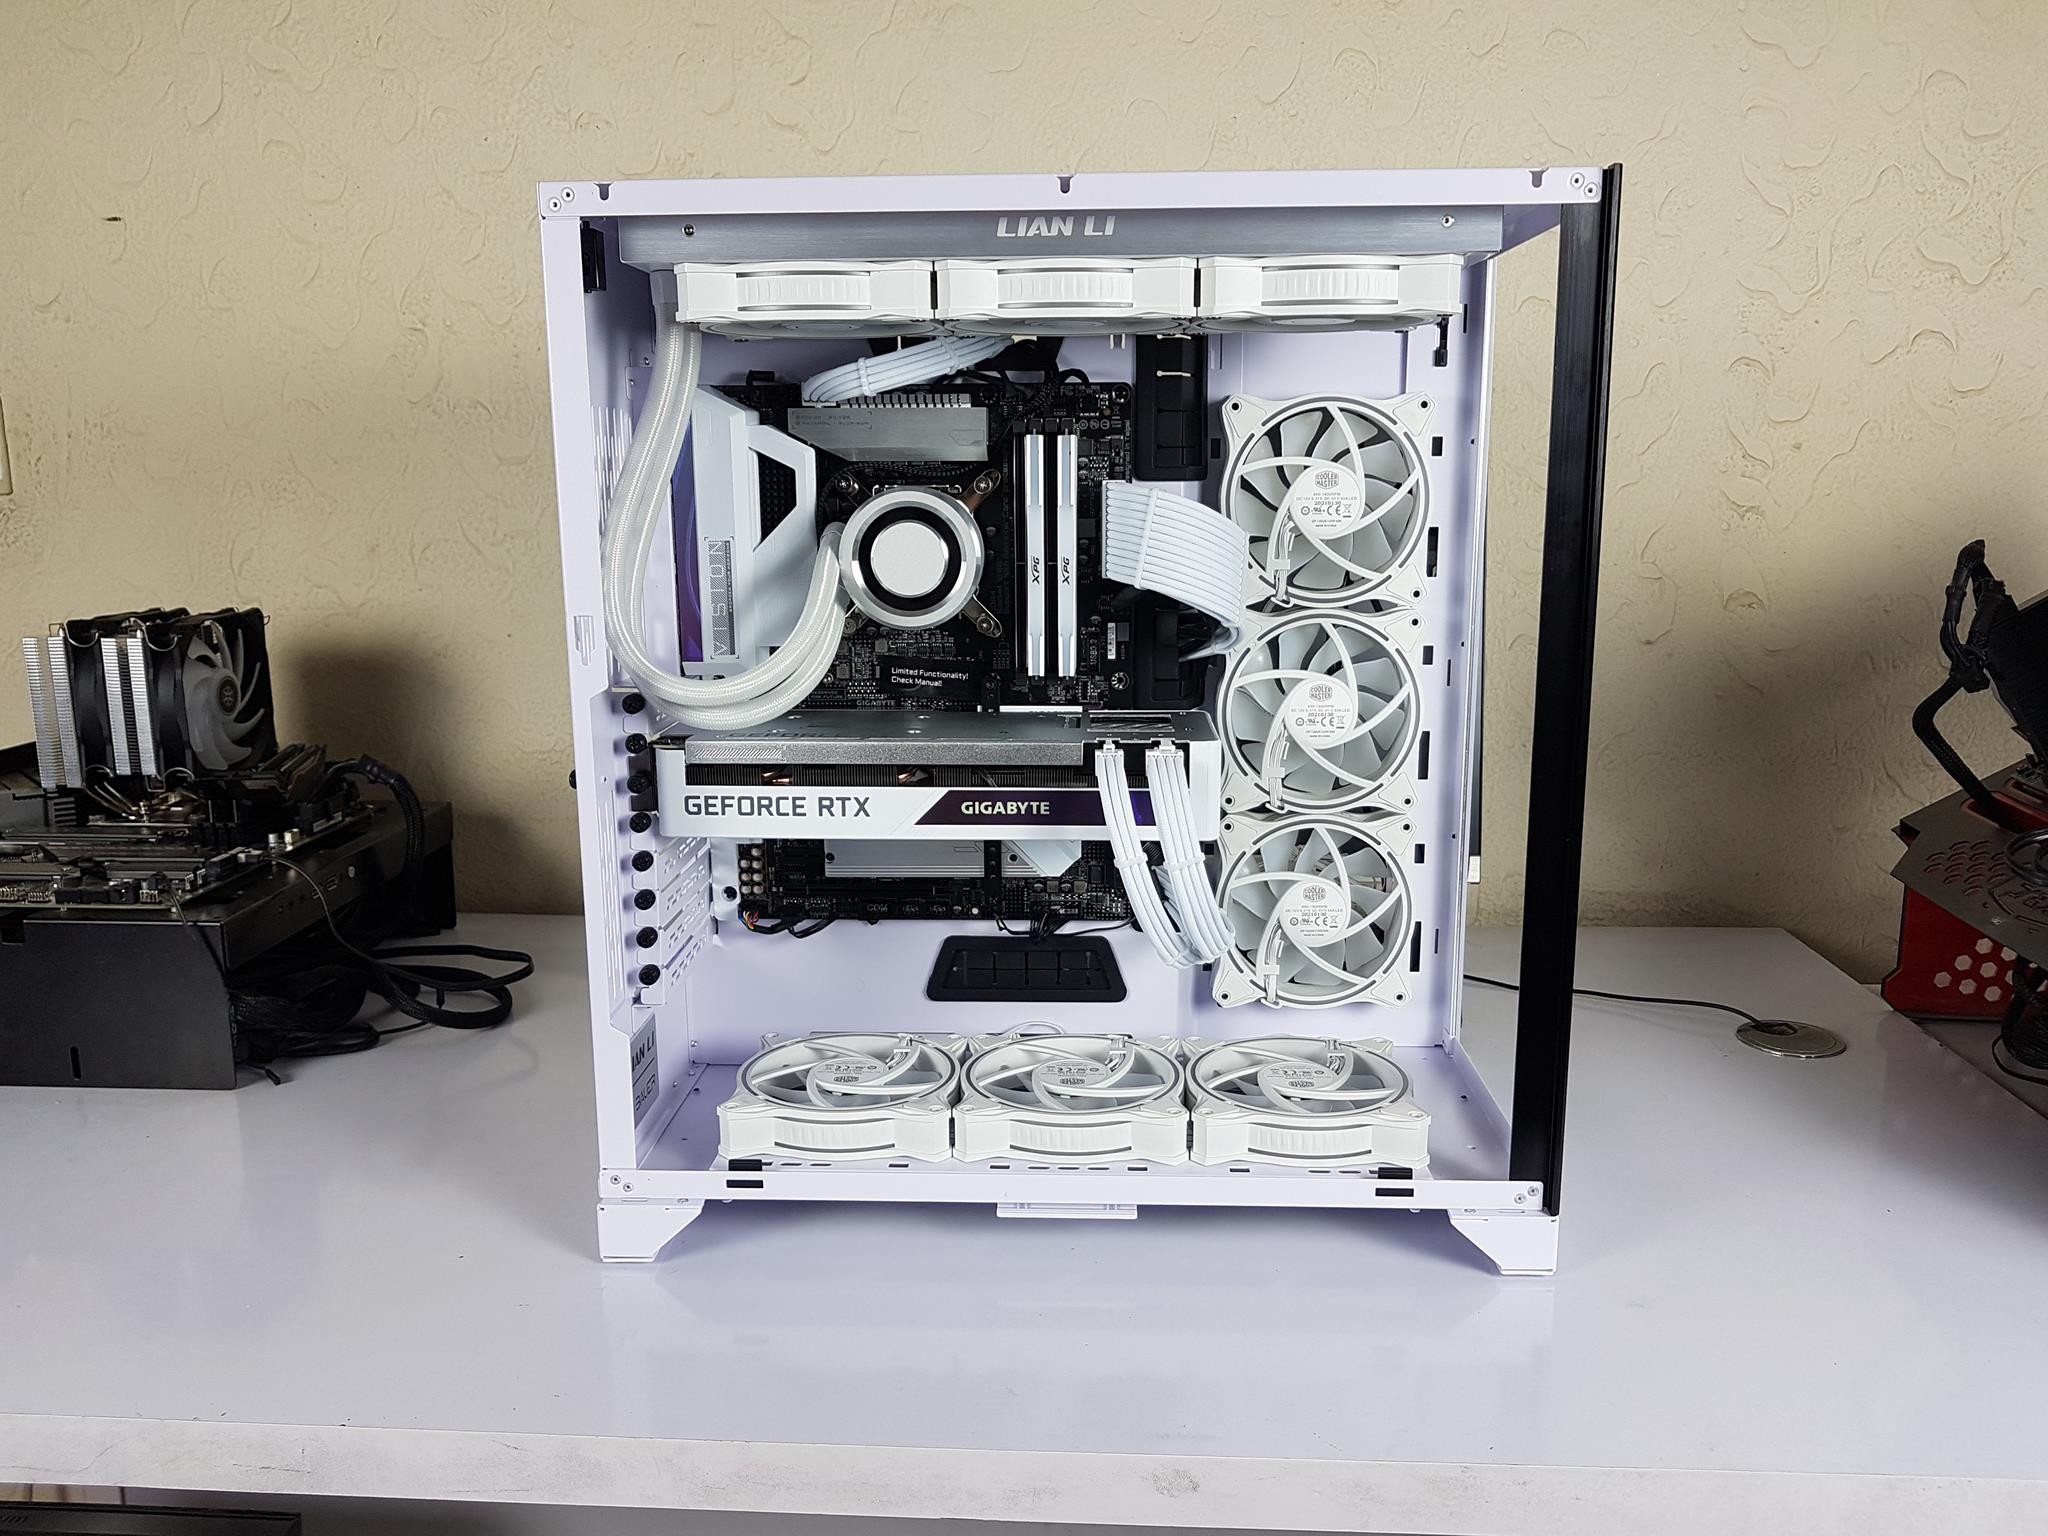 The final white build